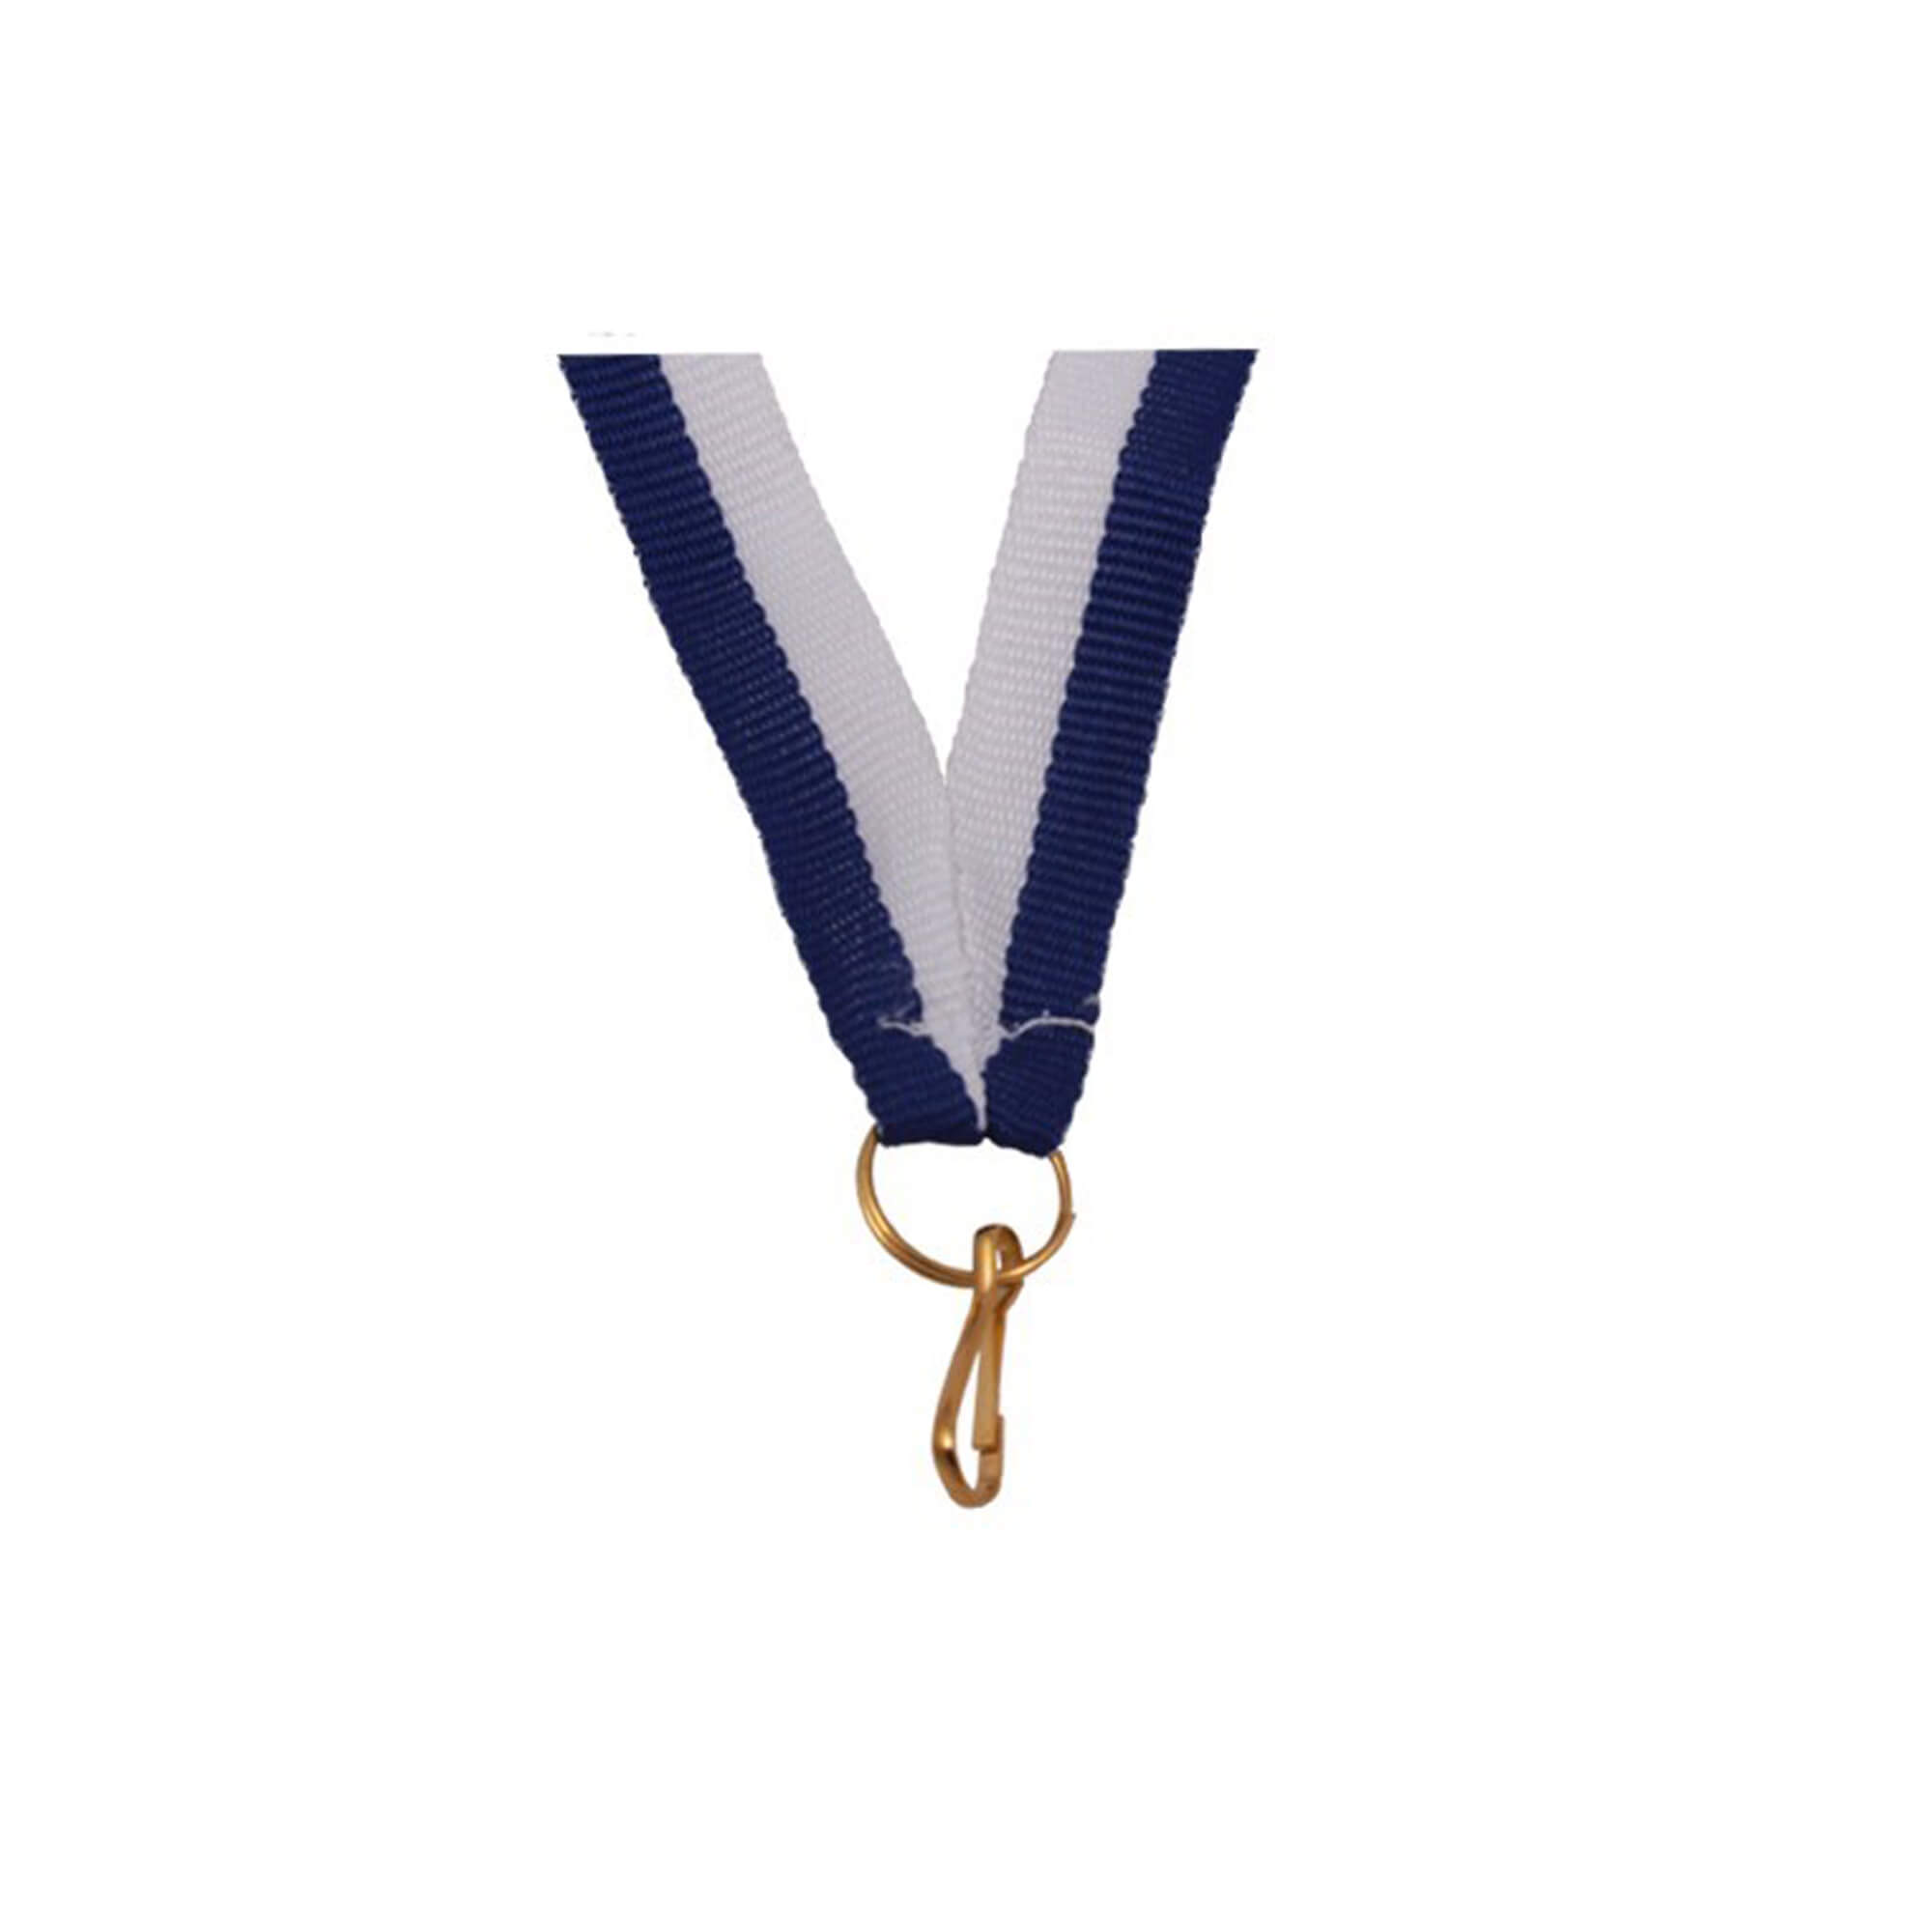 Medal ribbon 10 mm with ring, blue / white